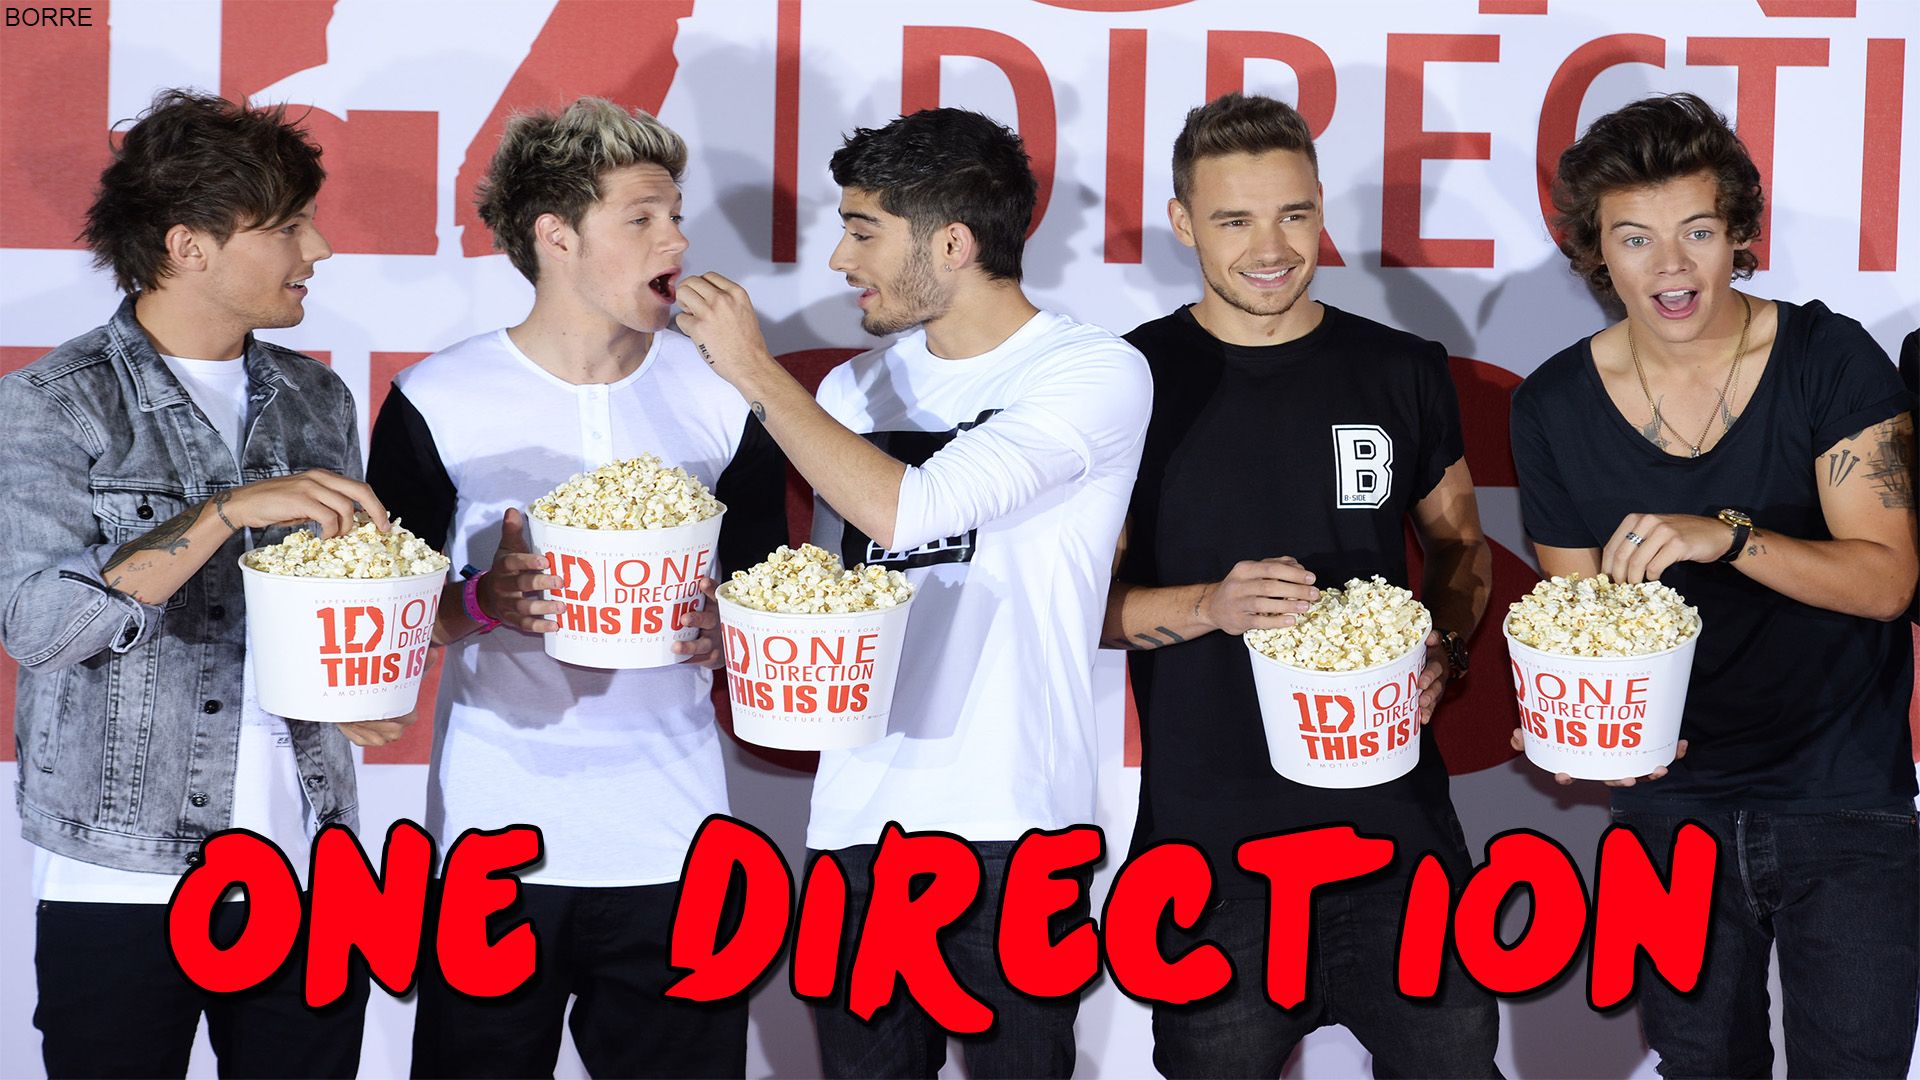 One Direction eating popcorn at a movie premiere - One Direction